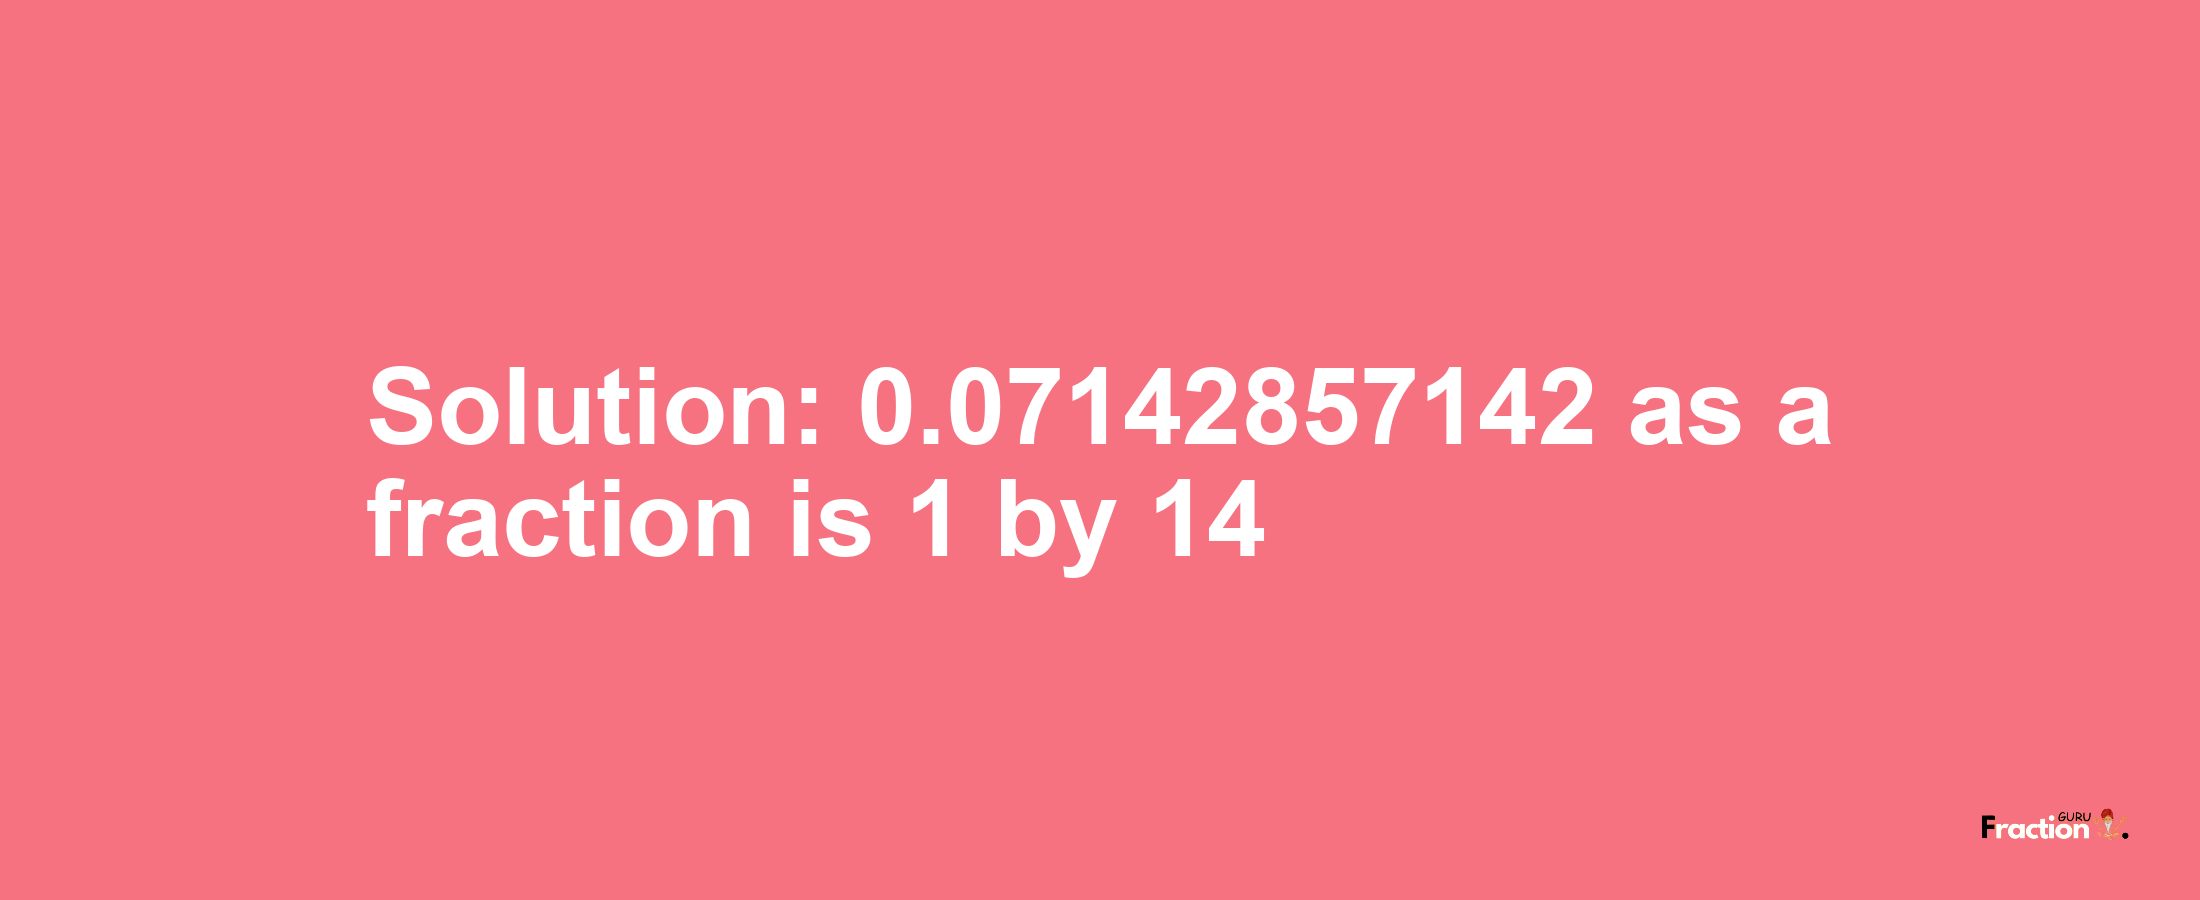 Solution:0.07142857142 as a fraction is 1/14